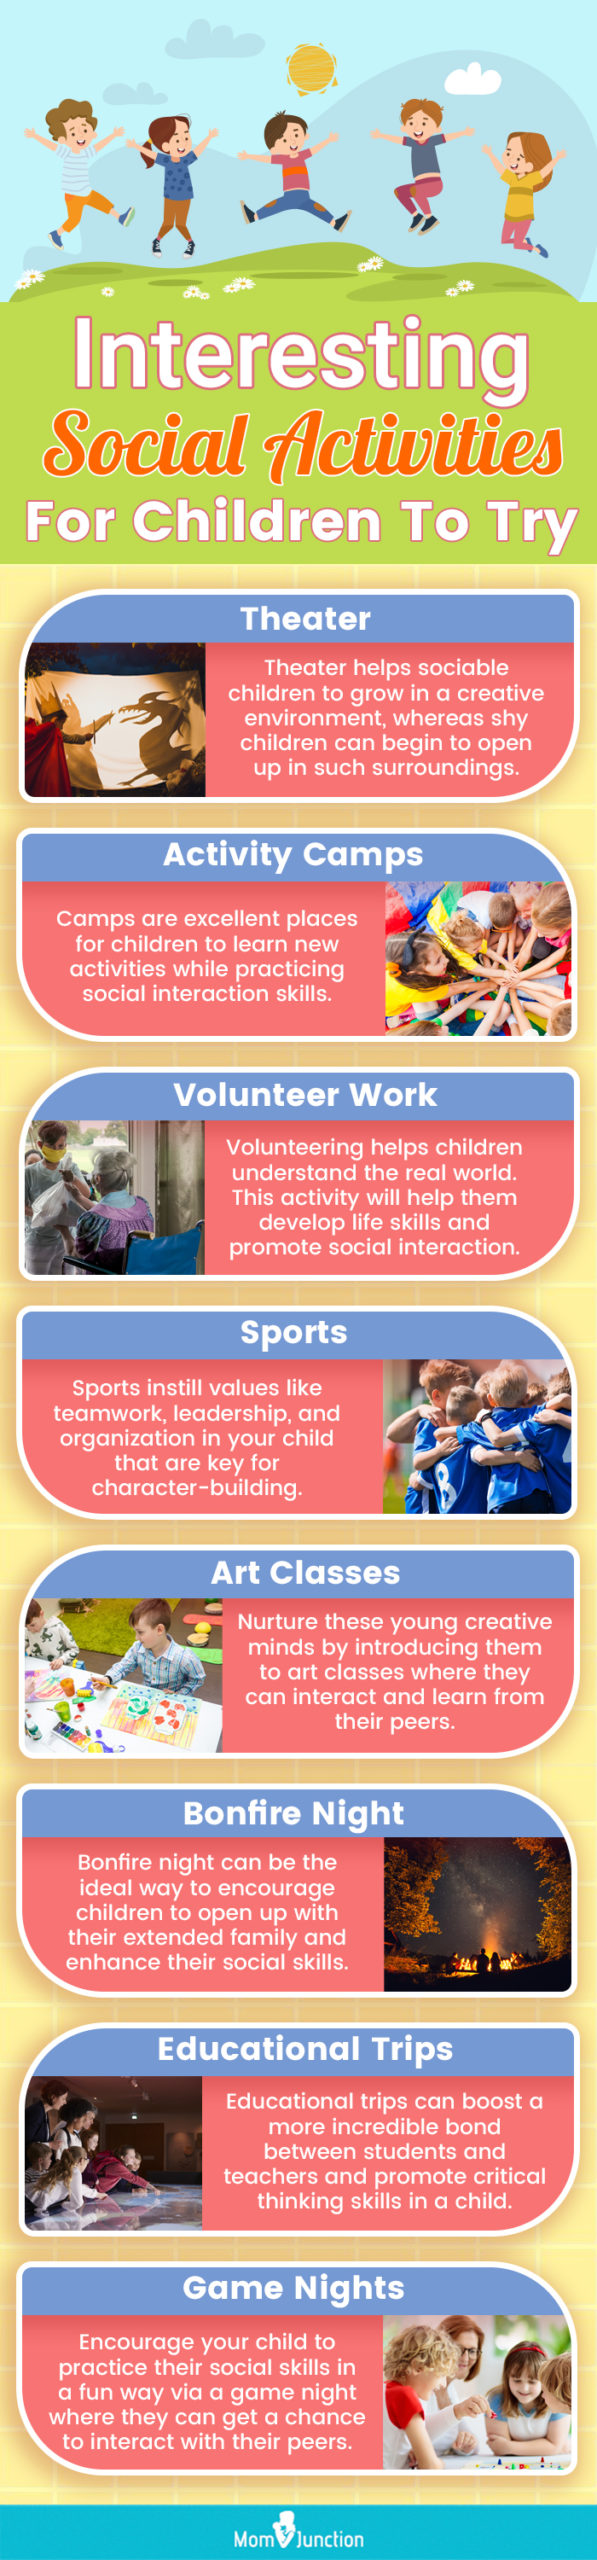 interesting social activities for children to try (infographic)